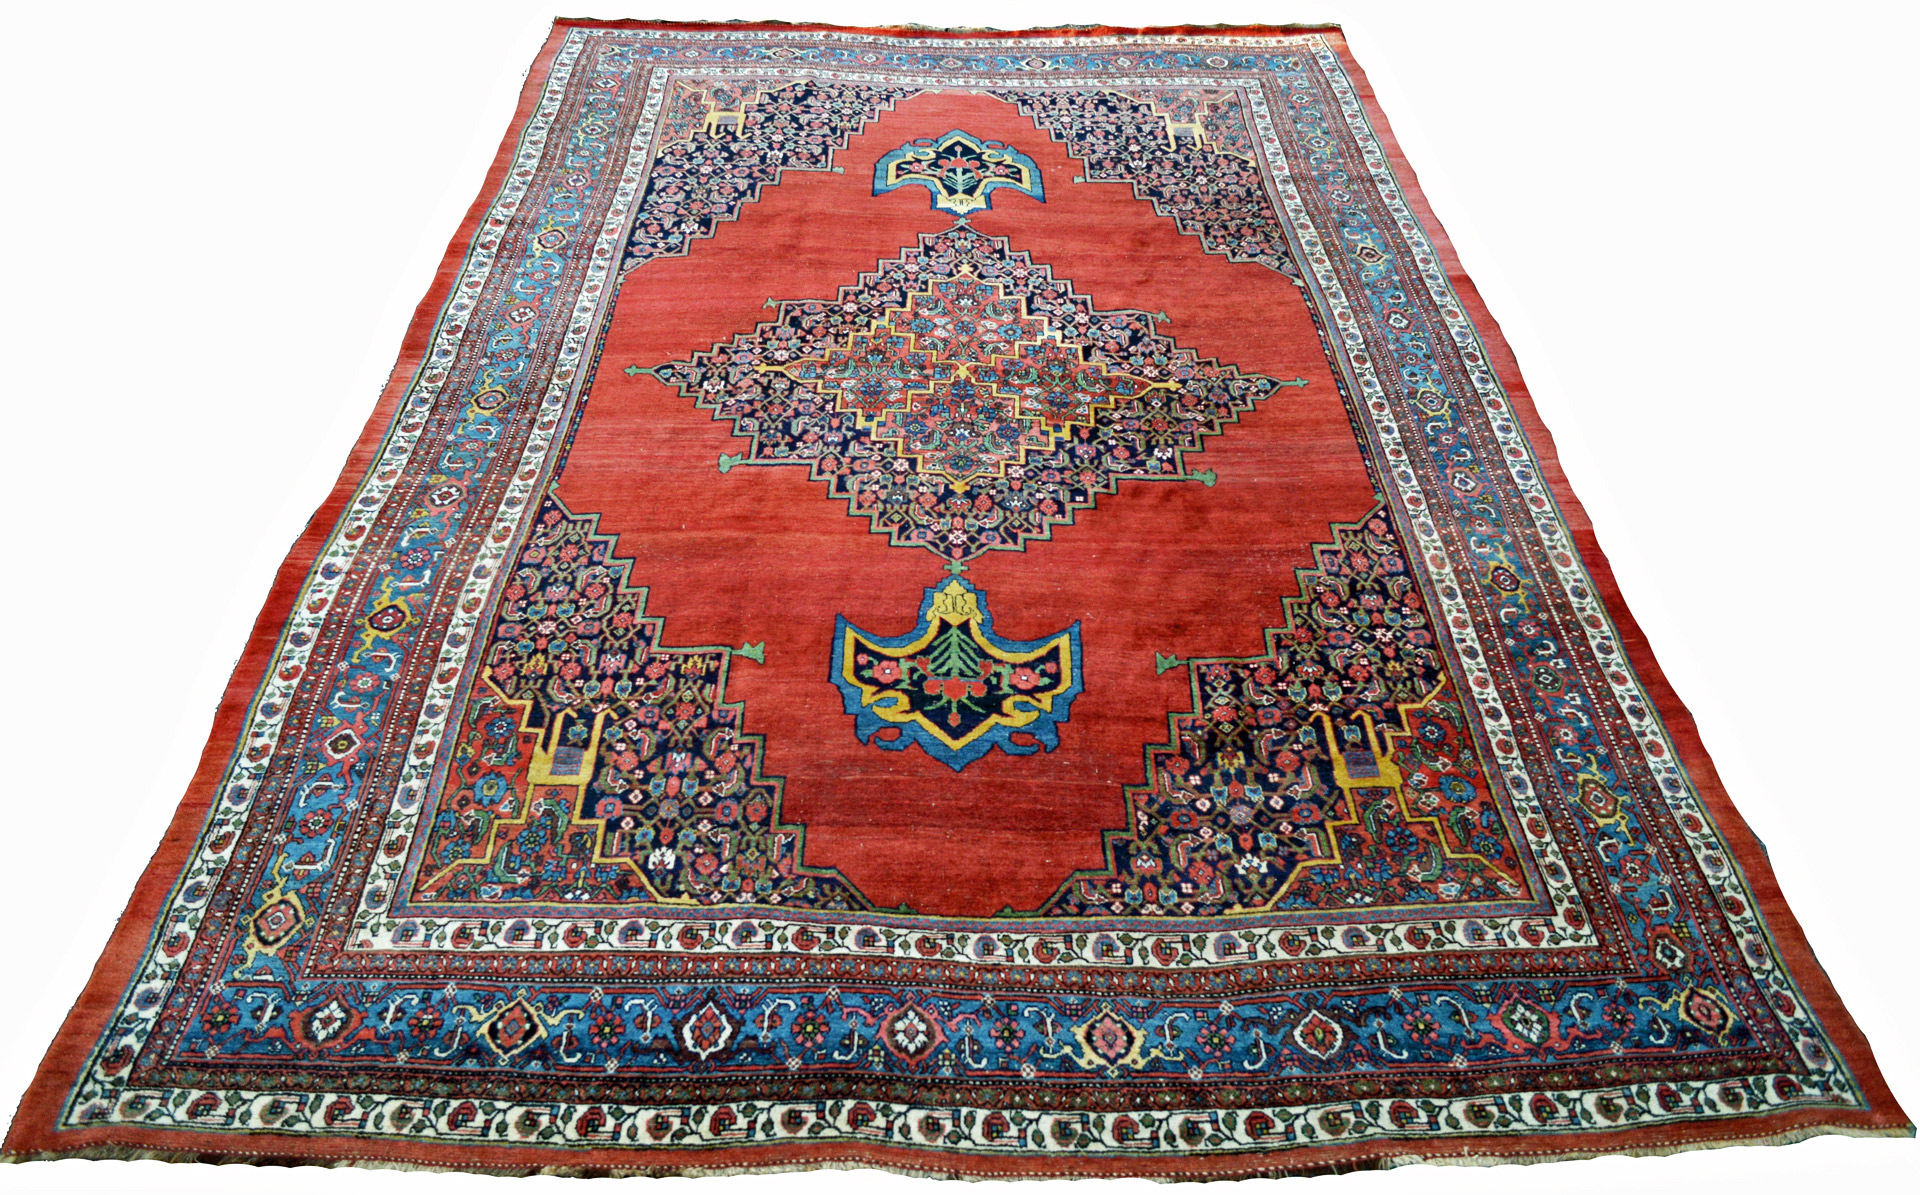 A room size antique Persian Bidjar carpet with a navy medallion with anchor pendants on a red open field. Northwest Persia, circa 1890 - Douglas Stock Gallery, antique Oriental rugs South Natick, Wellesley, Weston, Newton, Brookline, Boston,MA area, antique rugs New England USA